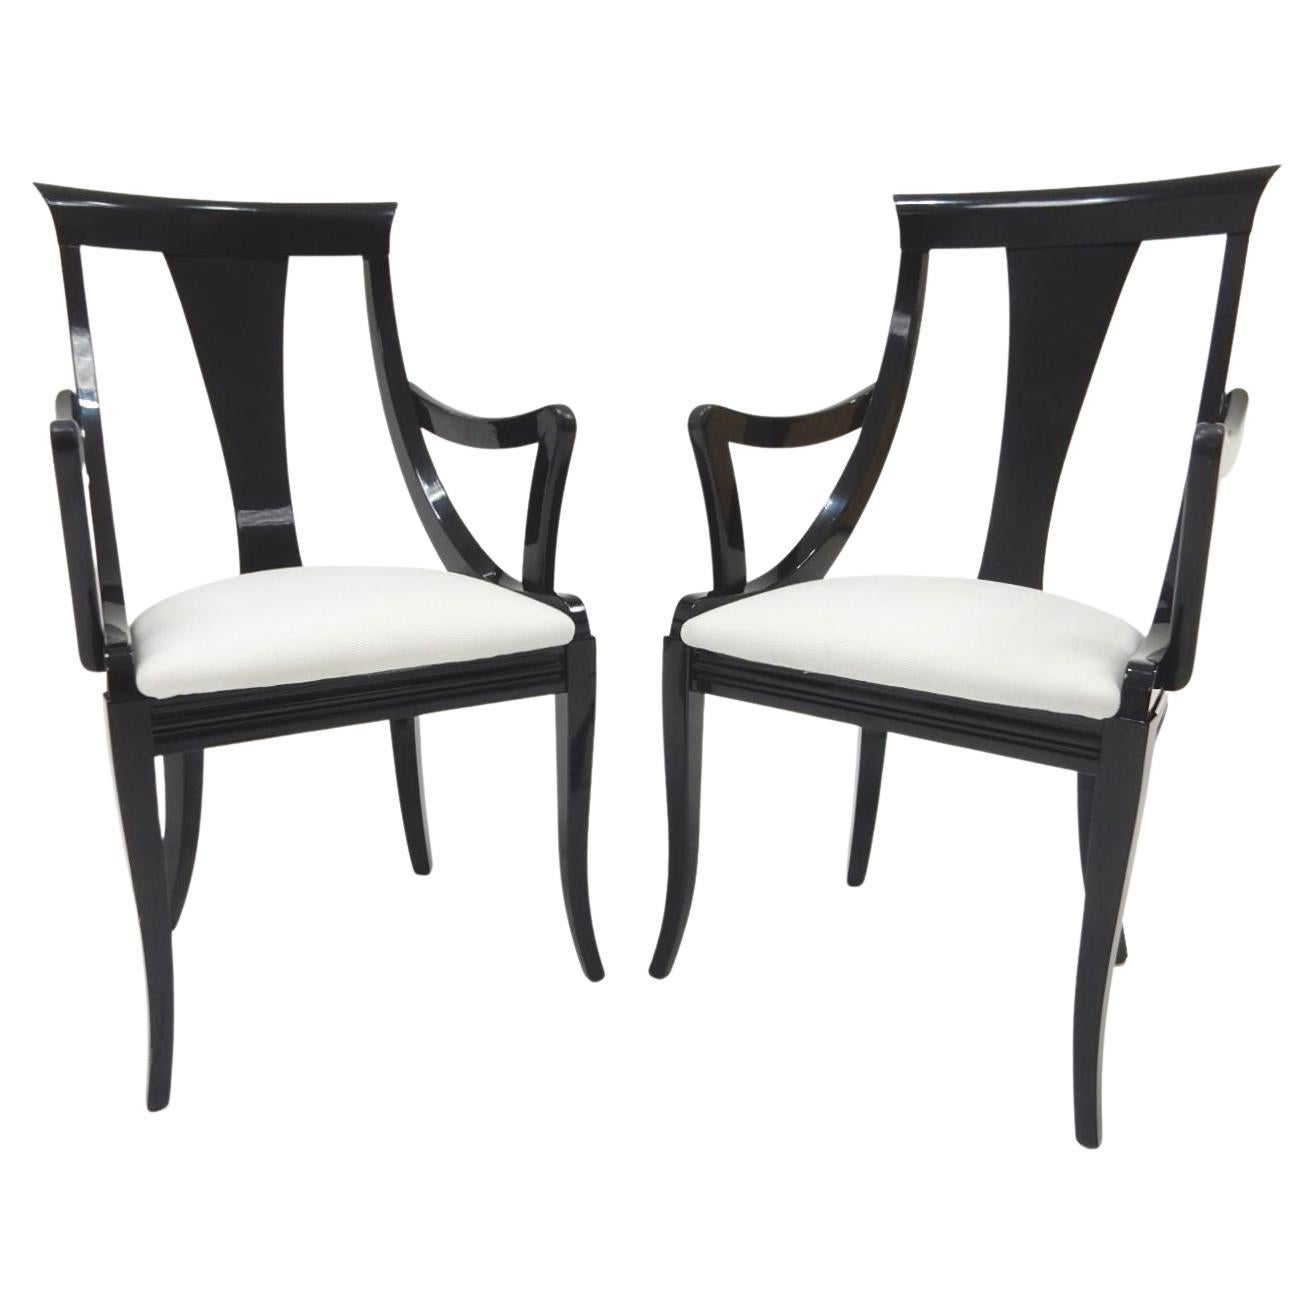 Sculptural armchairs by designer Pietro Costantini in glossy black lacquer.
Distributed by Ello Furniture, circa 1970s.
Chairs are new upholstered in woven white wool.
Each has Pietro Costantini tag on back of cushion.
All are solid with no